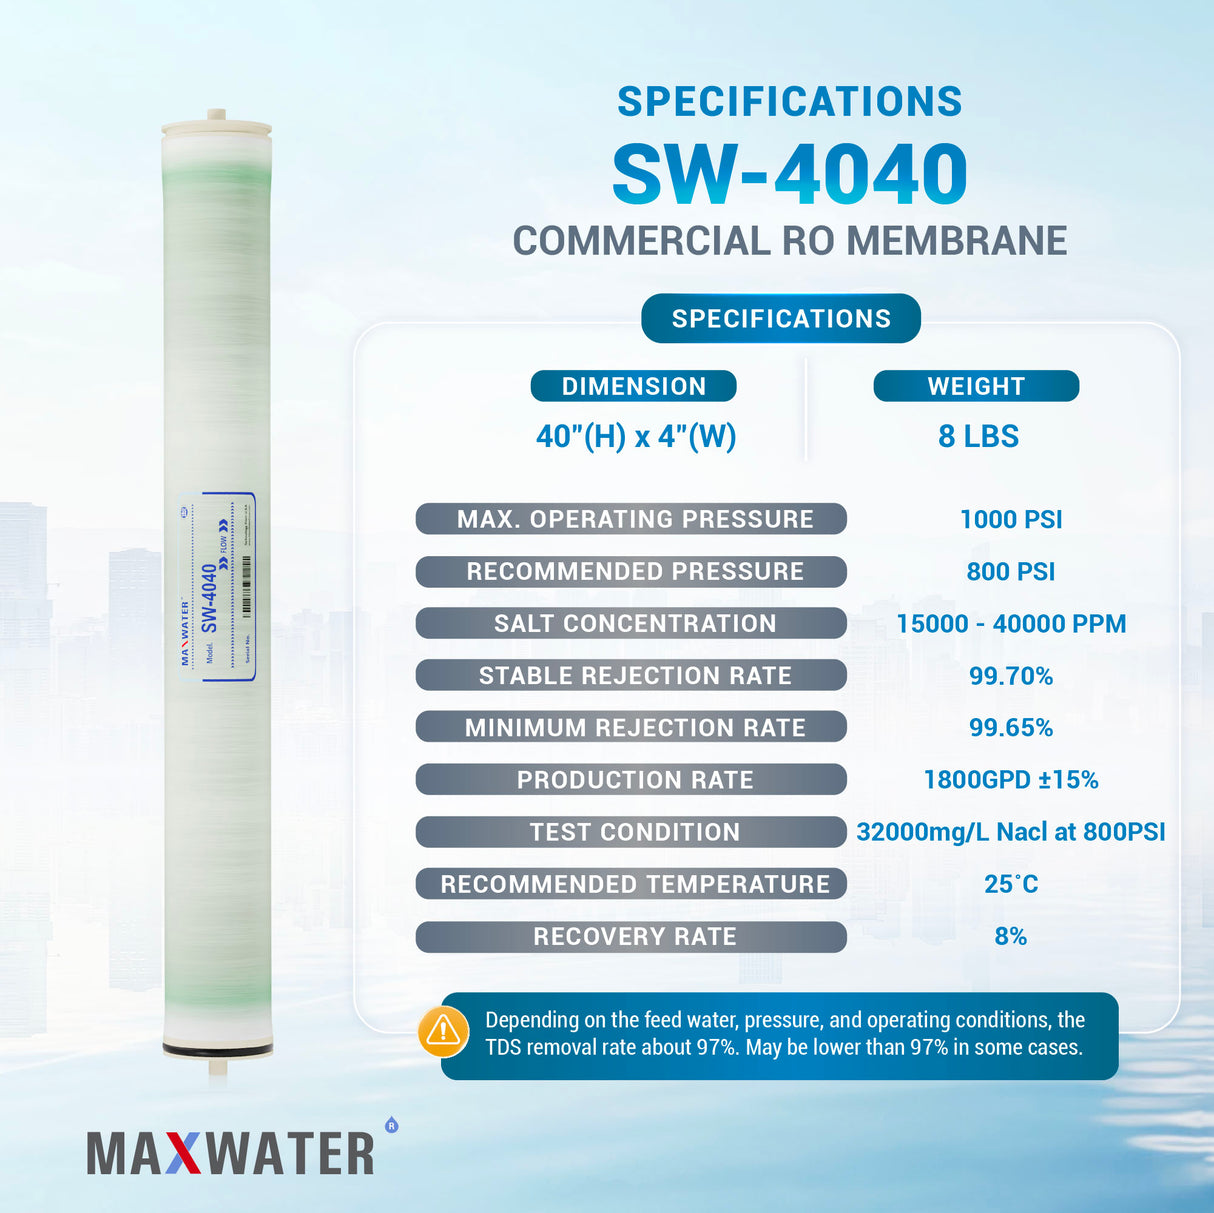 Advanced 4x40-inch RO membrane tailored for seawater - optimizing water filtration.